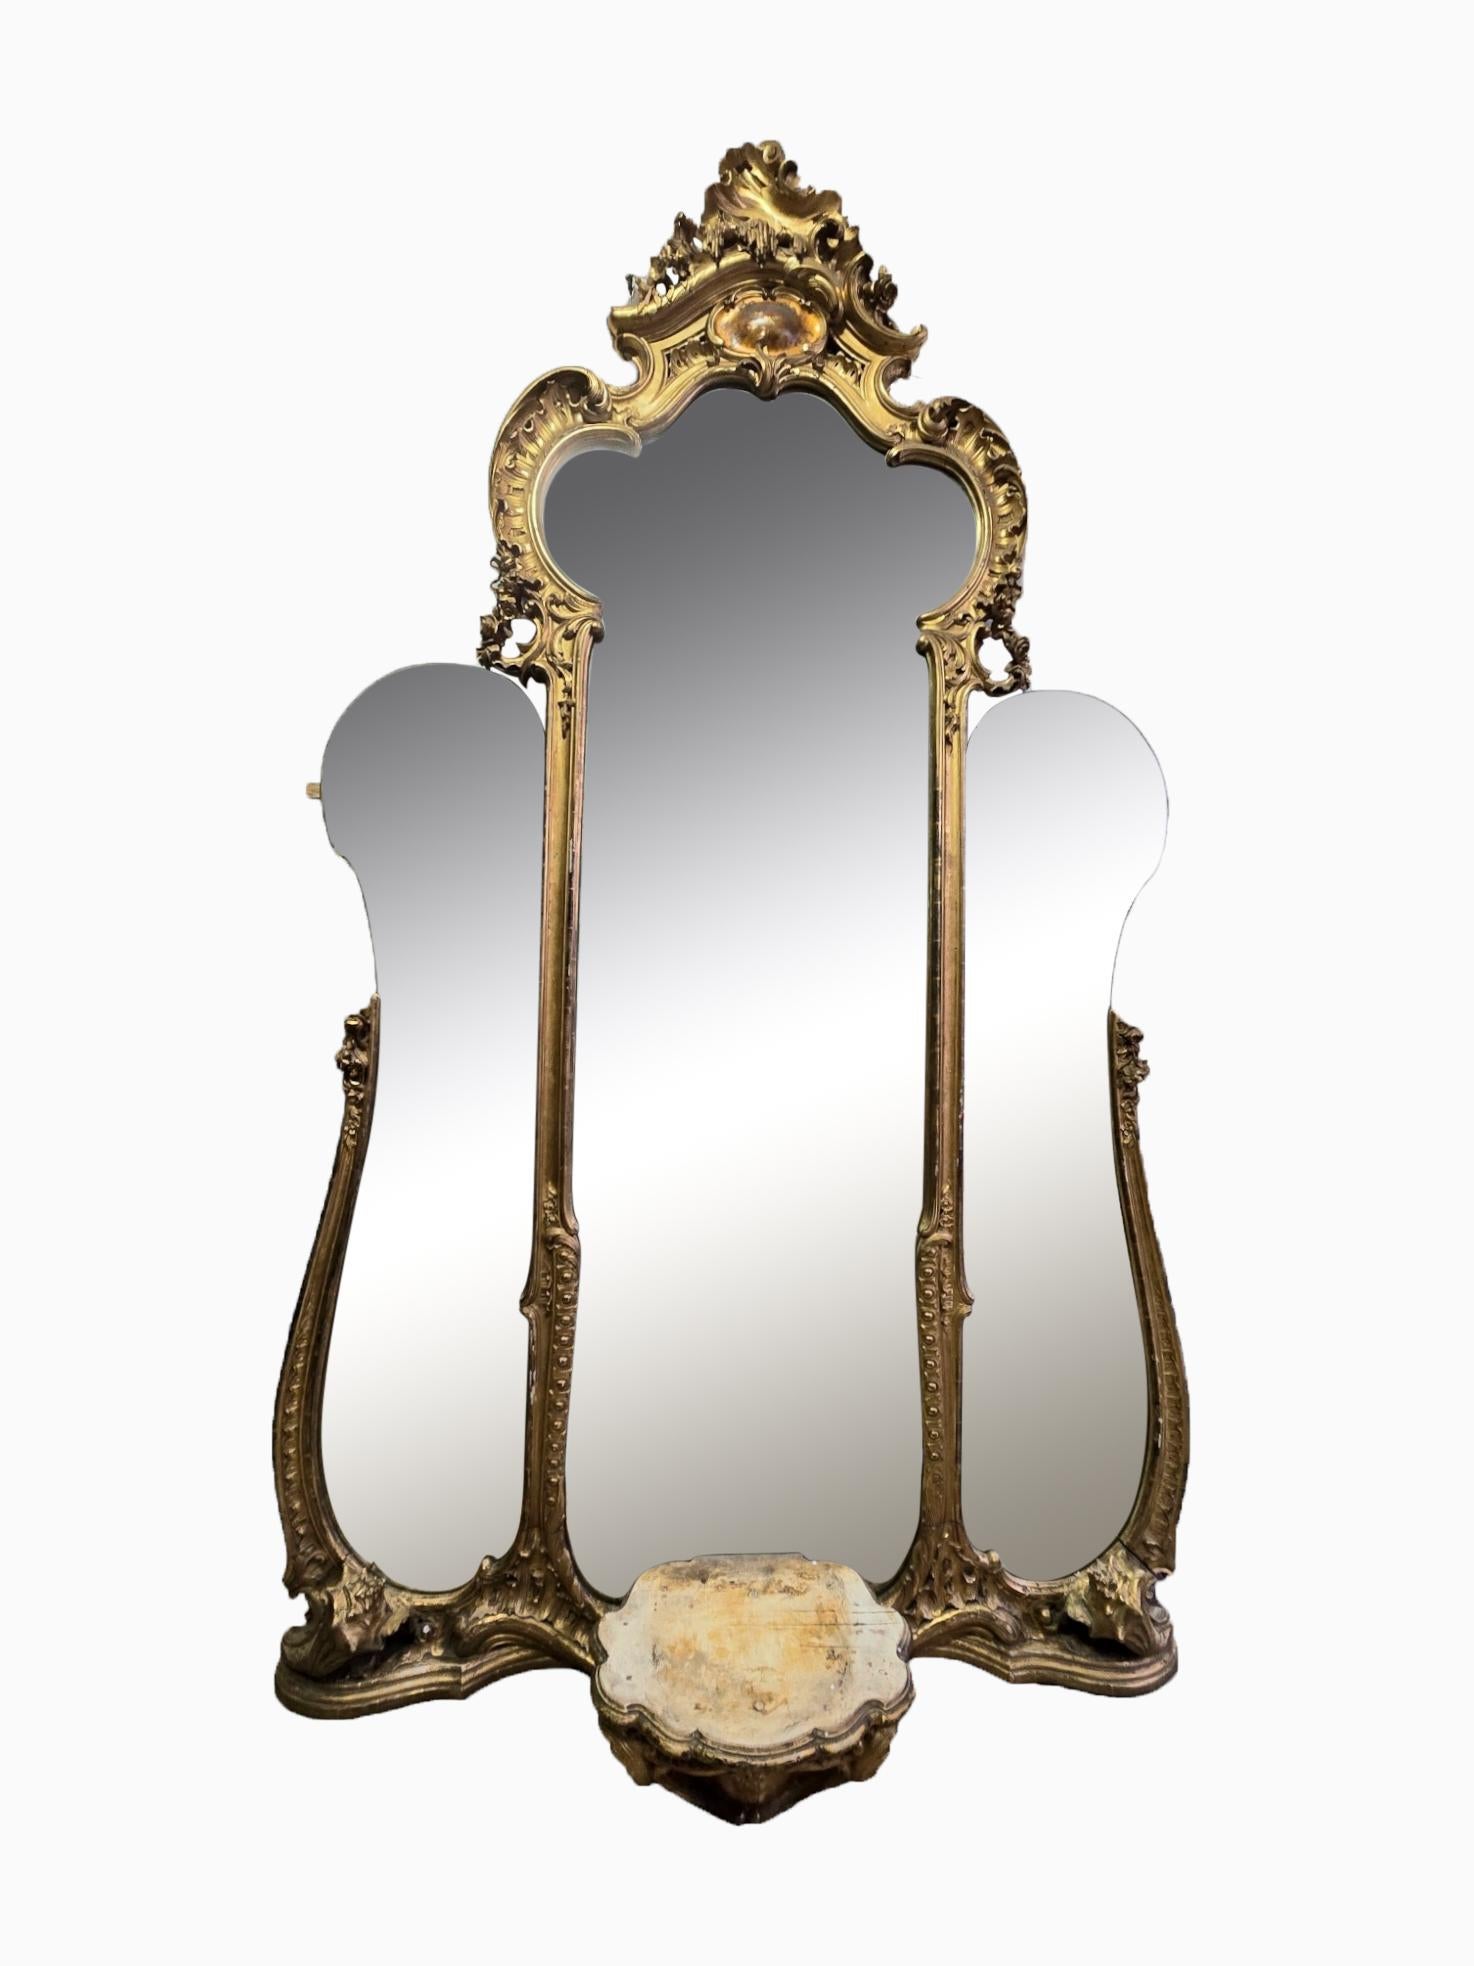 Fruitwood Monumental French Gilded Wood Mirror - A Historical Masterpiece of Luxury For Sale